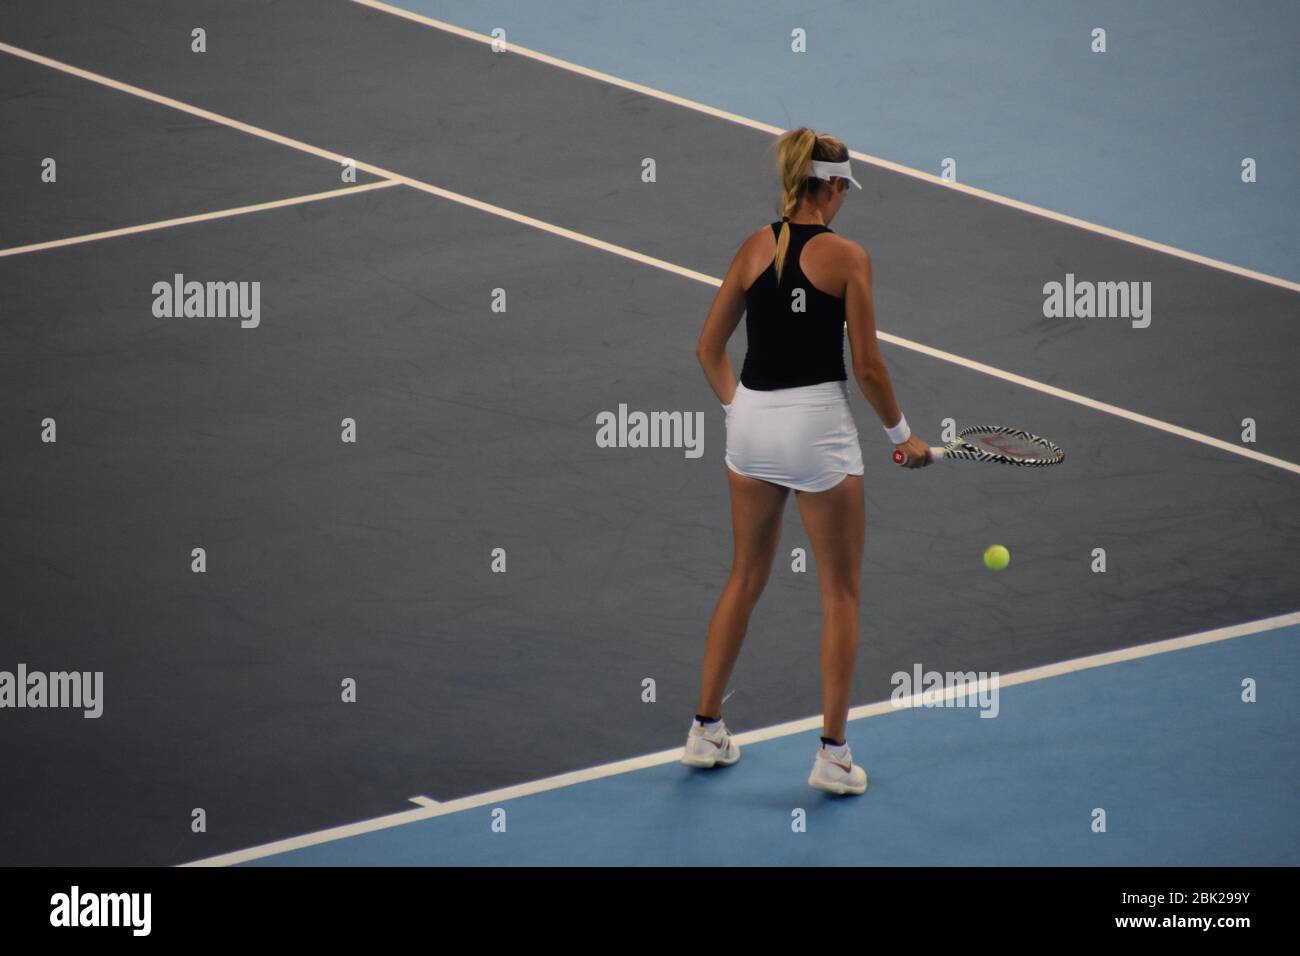 Katie Boulter of Great Britain at the Copper Box Arena, London on the 20th of April 2019 for the women’s tennis FED CUP (Team GB). Stock Photo